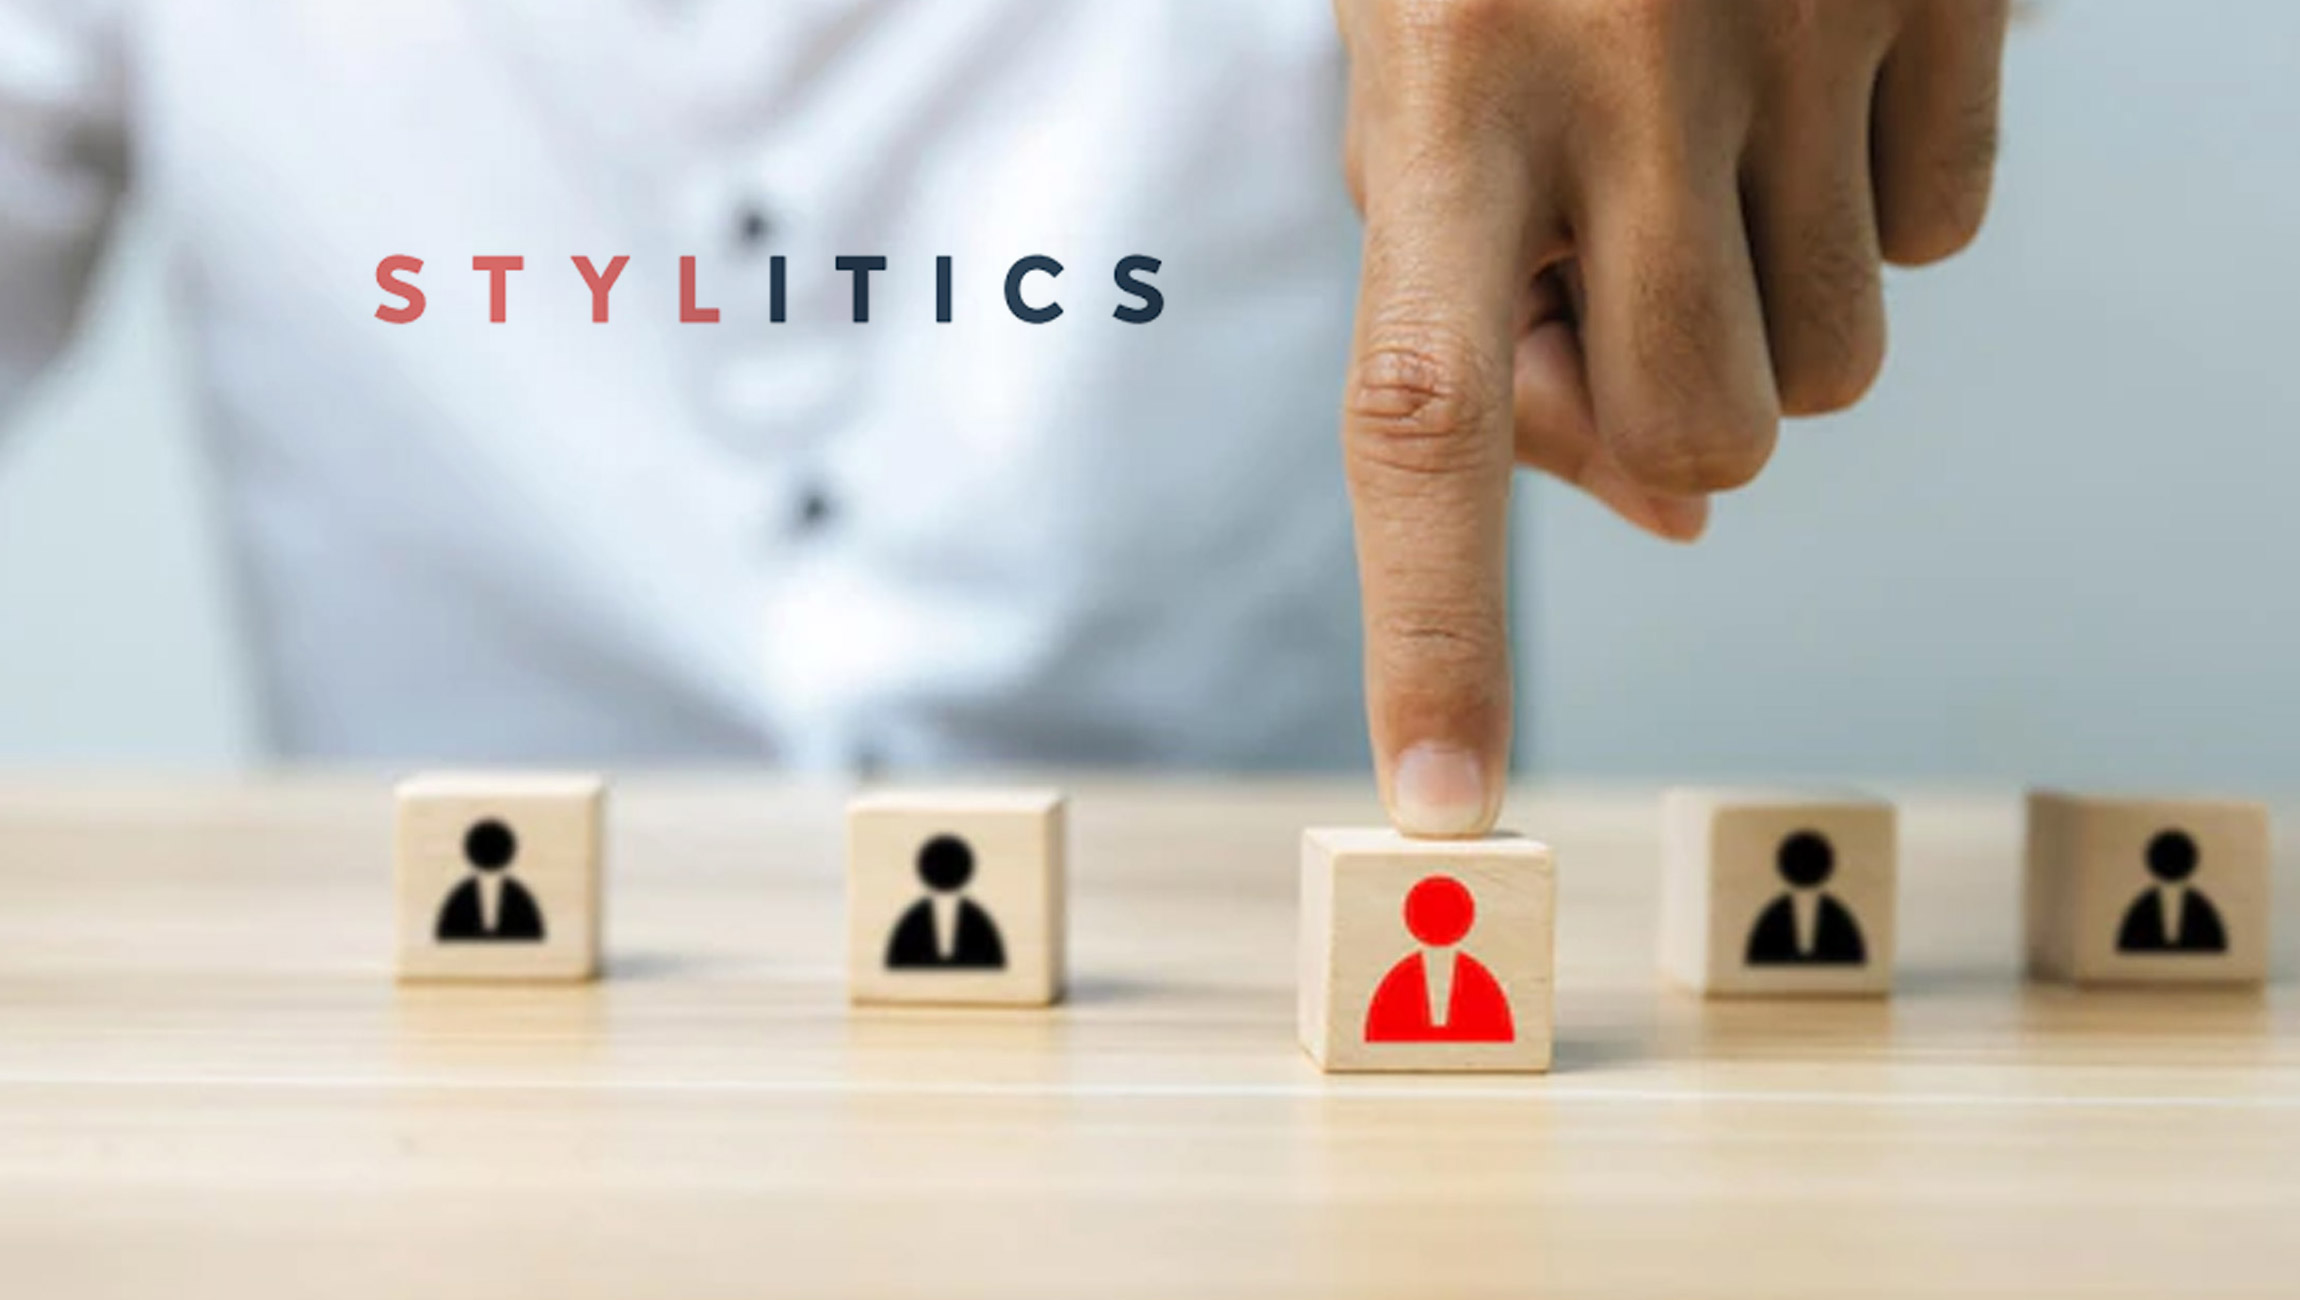 Stylitics Expands Its Executive Leadership Teams to Accelerate Product and Vertical Expansion